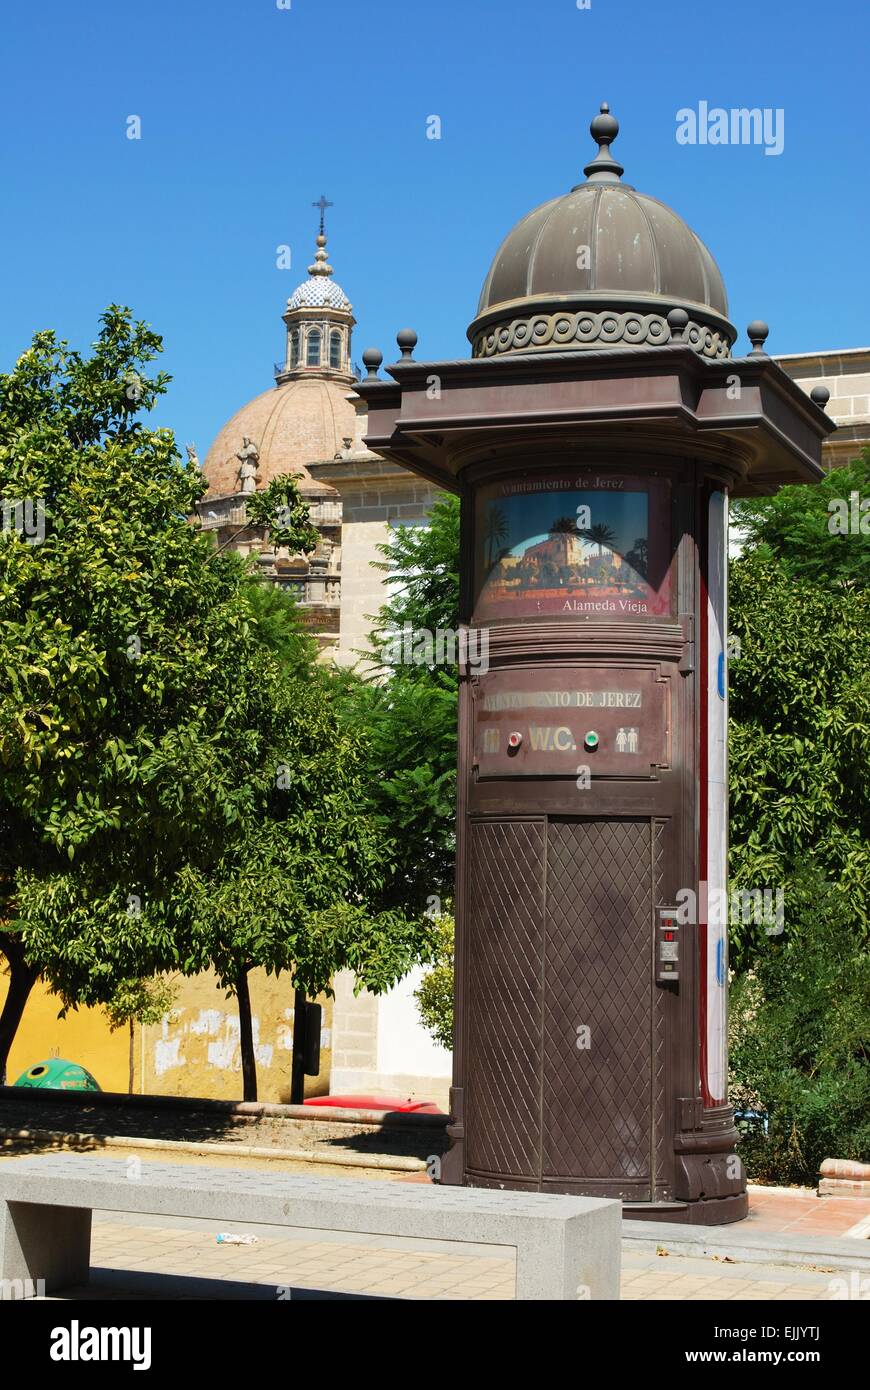 Old fashioned Water Closet with the Cathedral dome to the rear, Jerez de la Frontera, Cadiz Province, Andalusia, Spain. Stock Photo